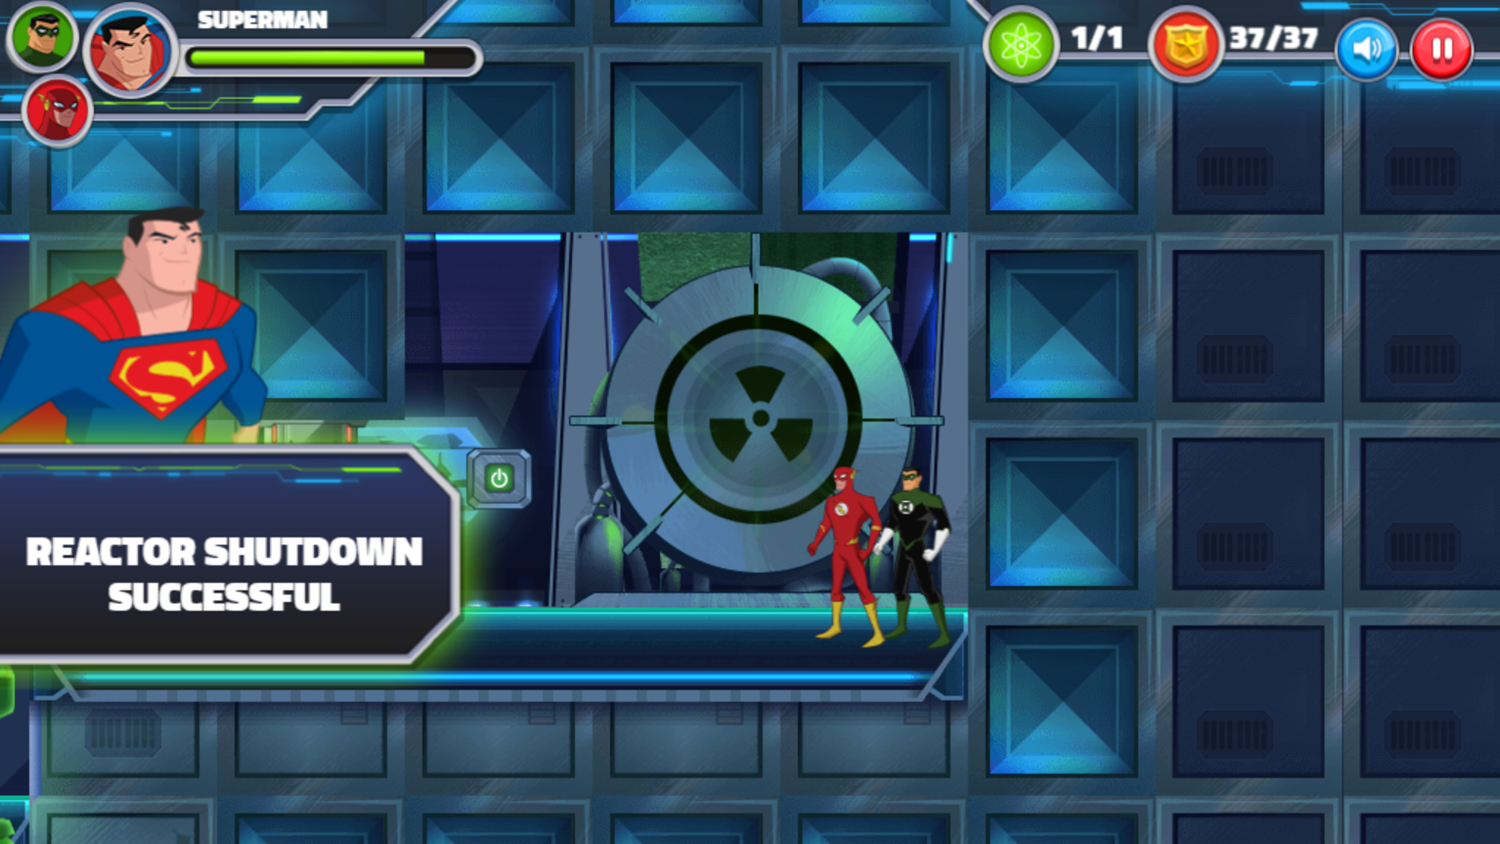 Justice League Action Nuclear Rescue Game Area Complete Screenshot.